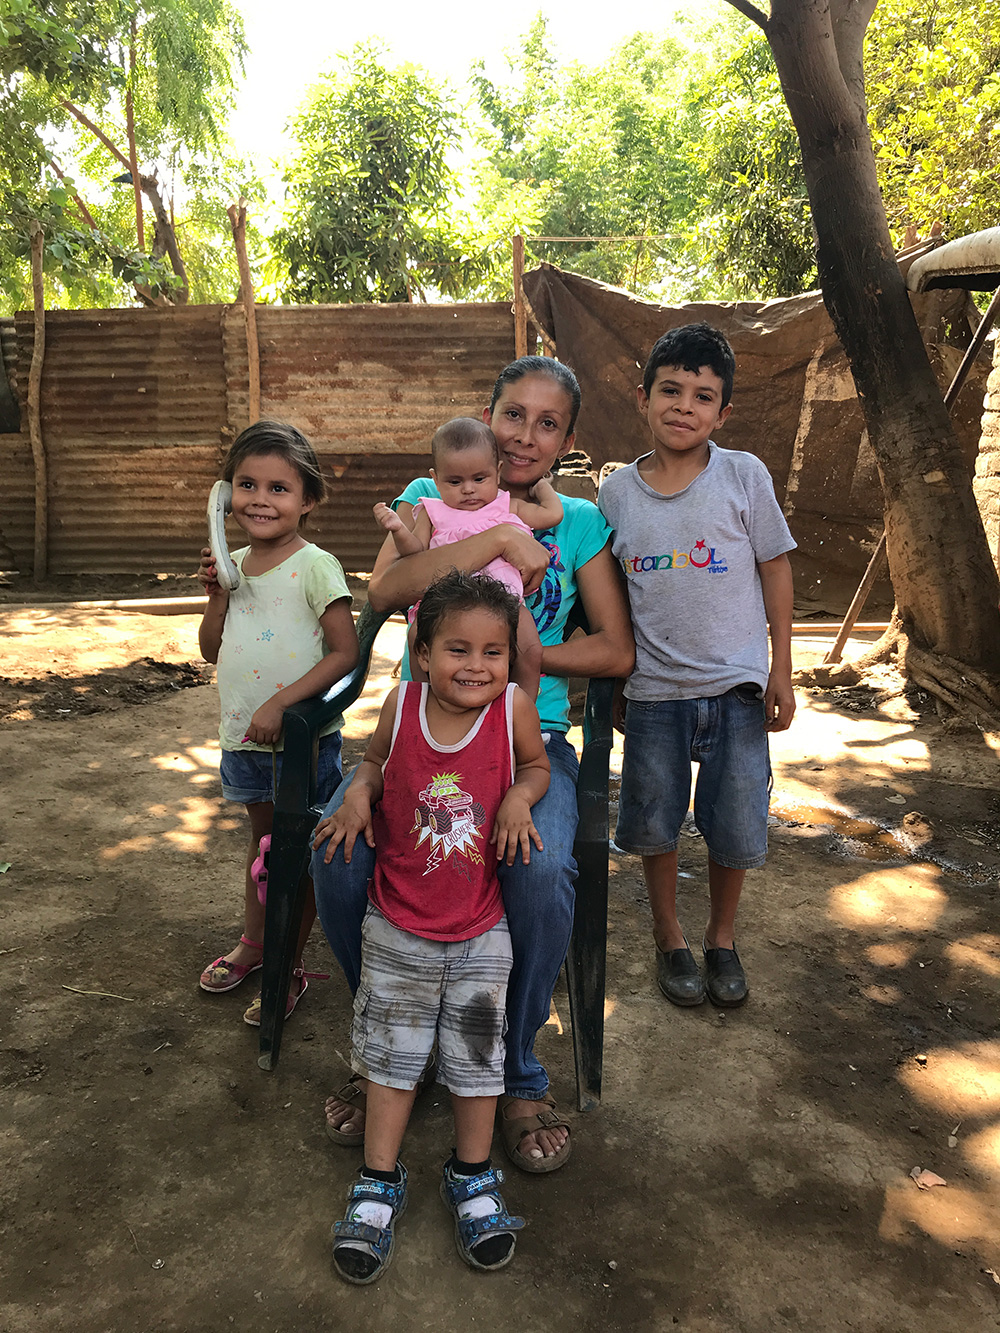 A family served in Nicaragua through ORPHANetwork's partnership with Rise Against Hunger.